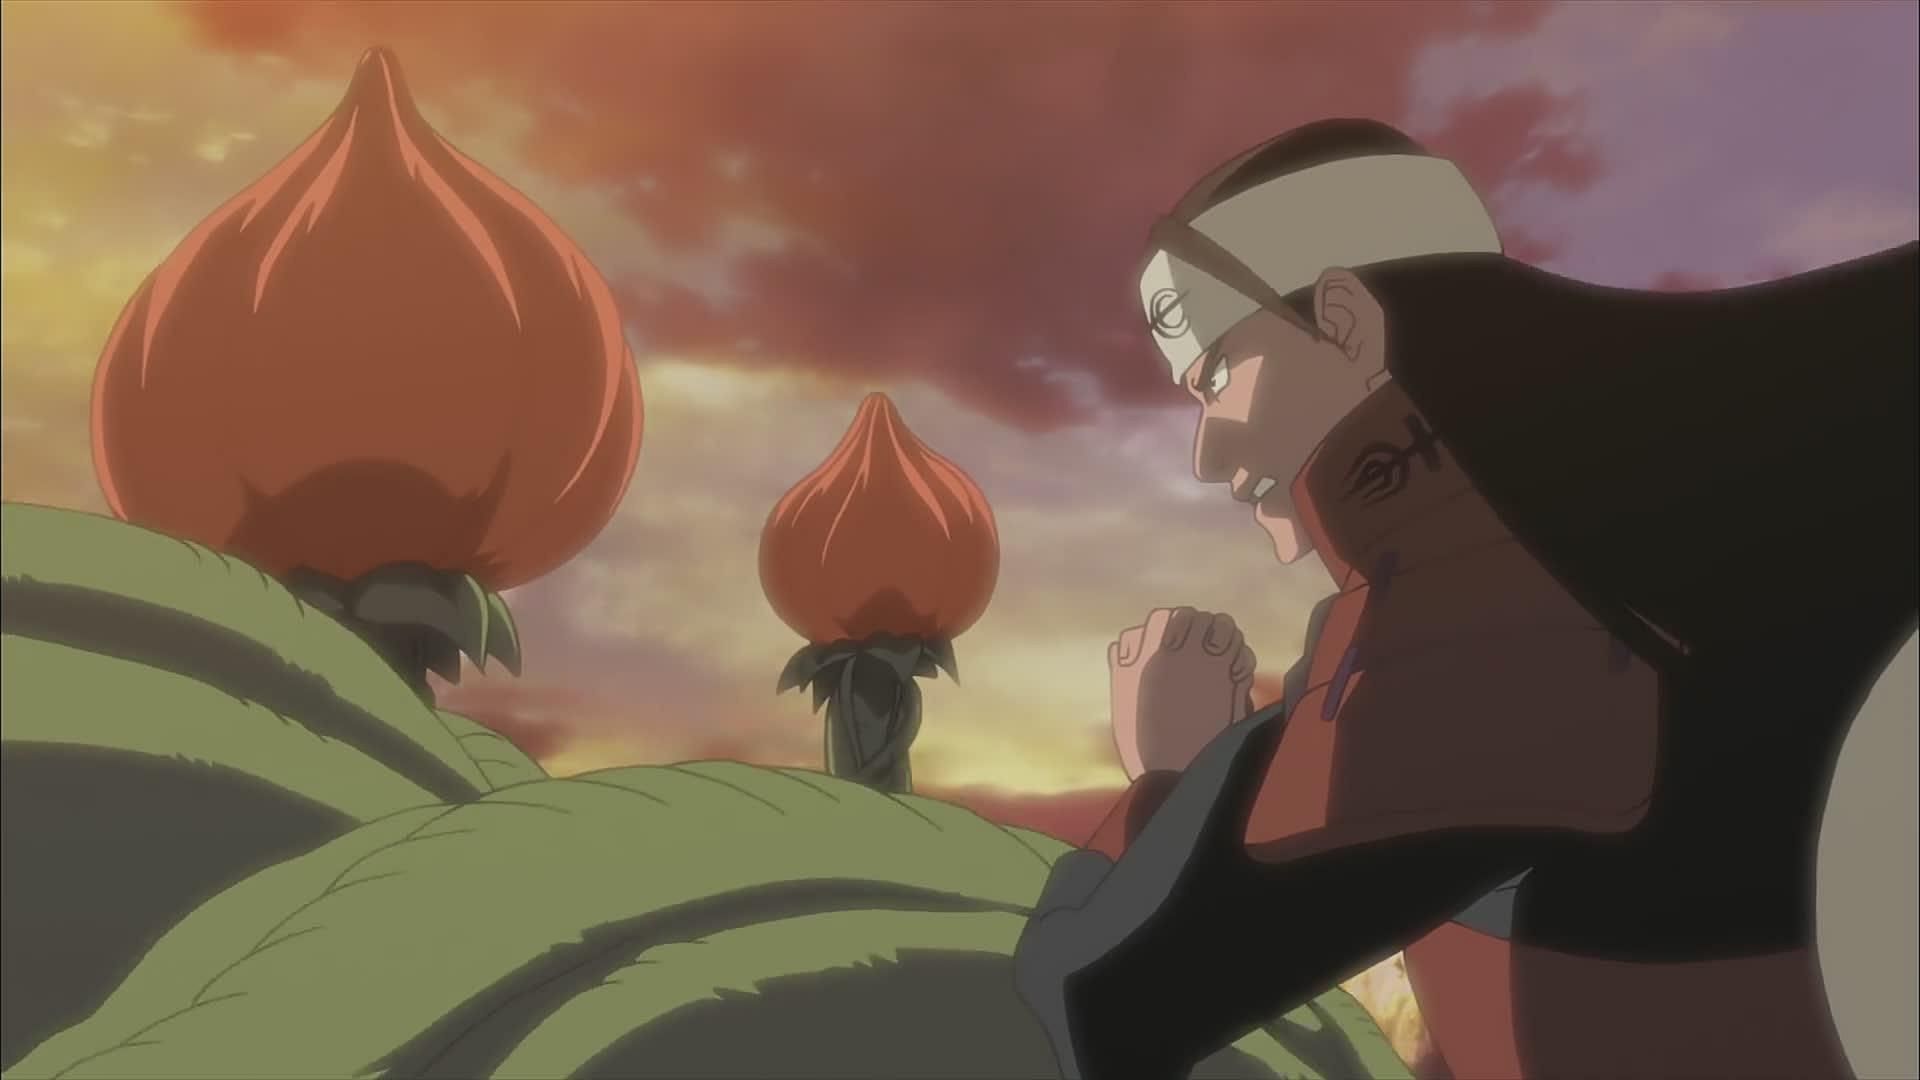 The World of Flowering Trees as seen in the Naruto series (Image via Studio Pierrot)